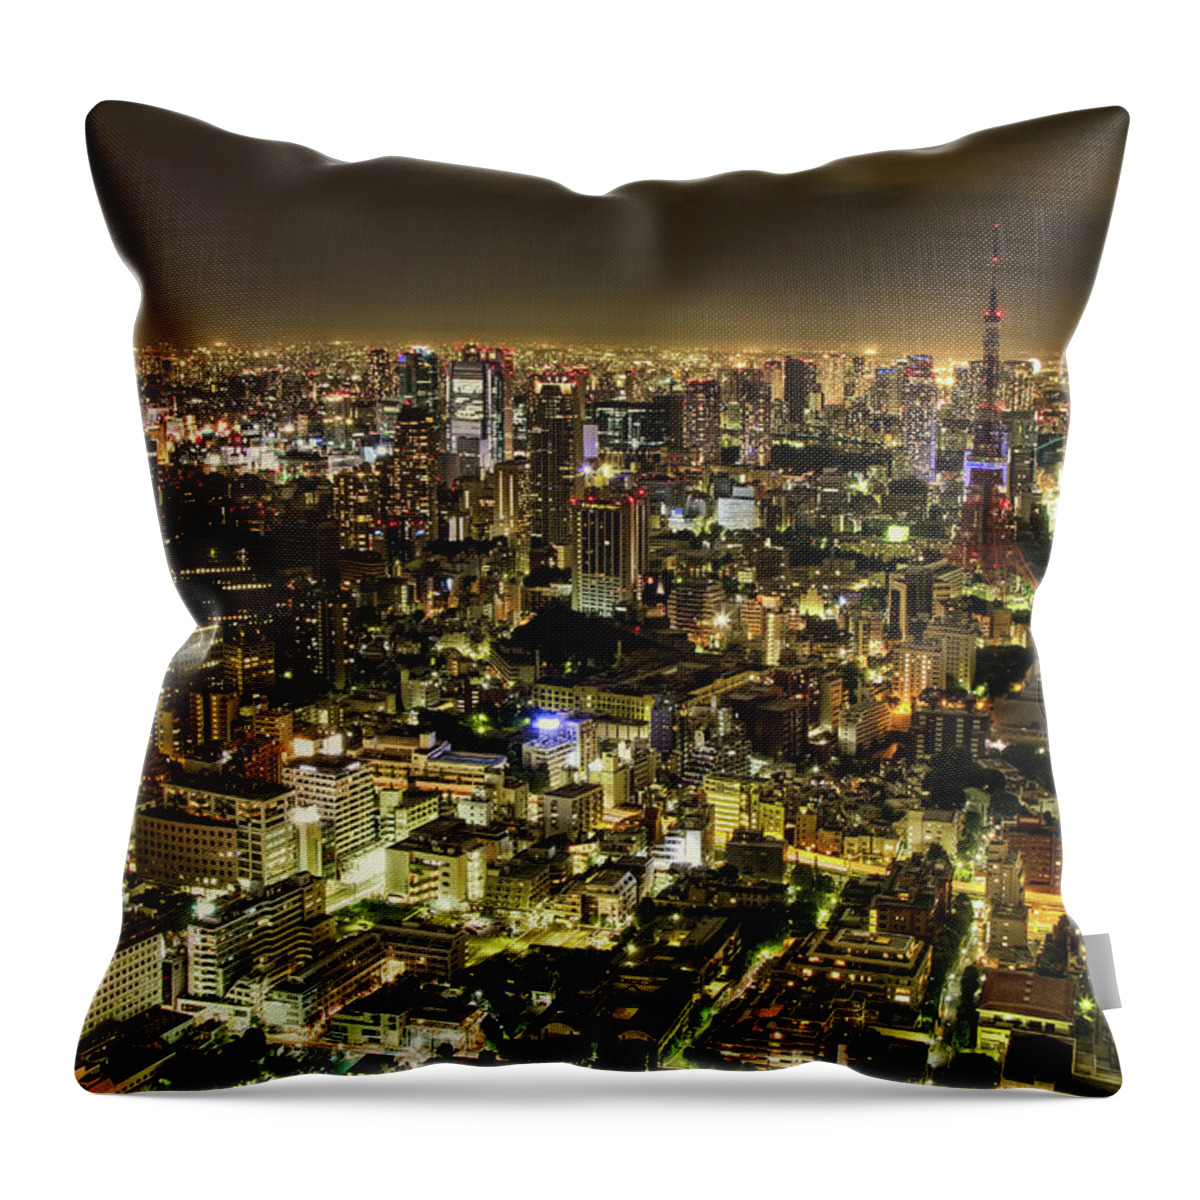 Clear Sky Throw Pillow featuring the photograph Cityscape At Night by Agustin Rafael C. Reyes